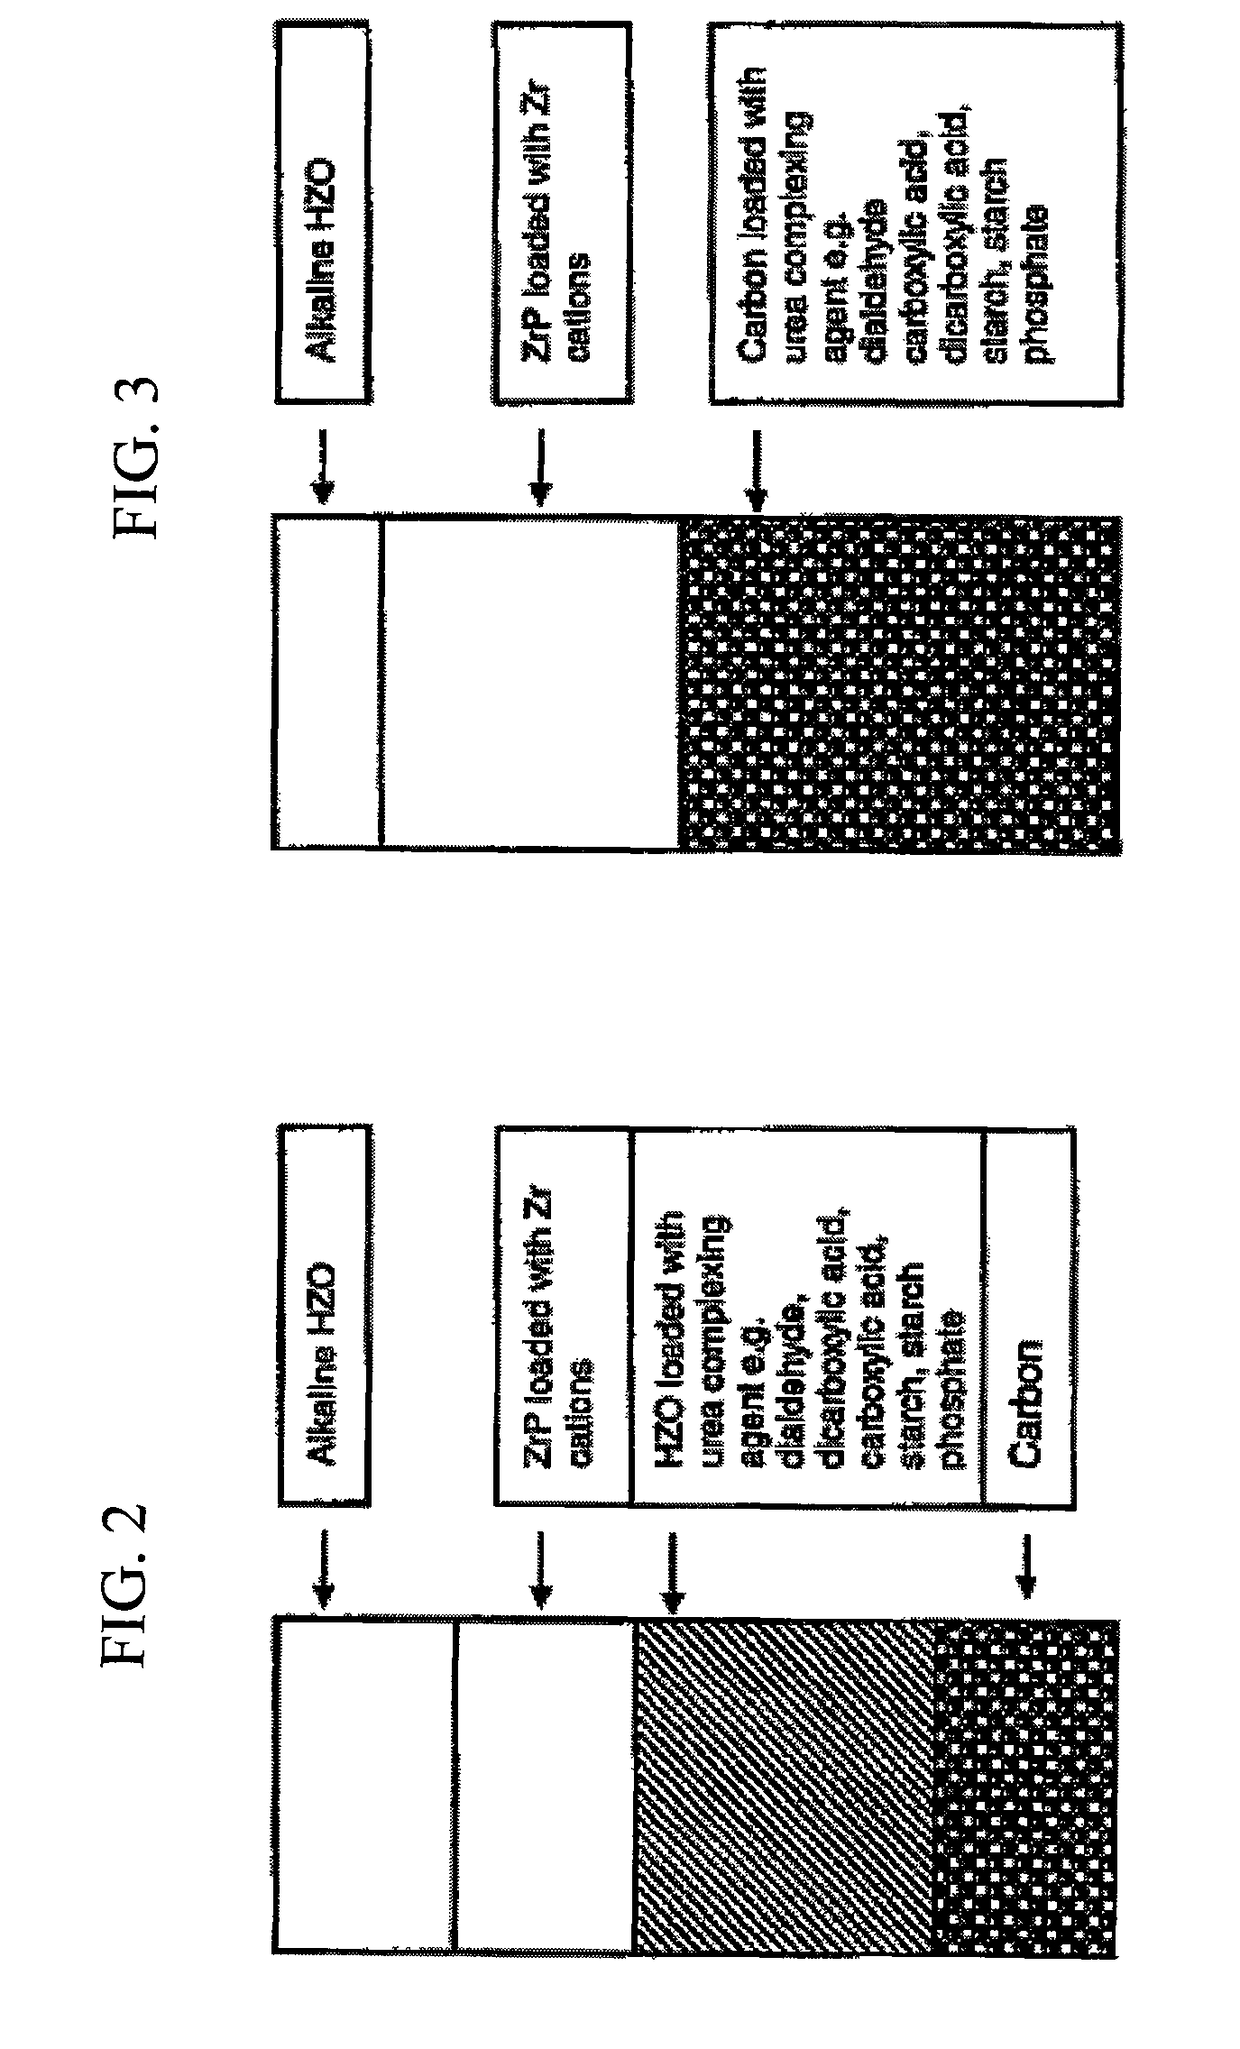 Materials for removal of toxins in sorbent dialysis and methods and systems using same